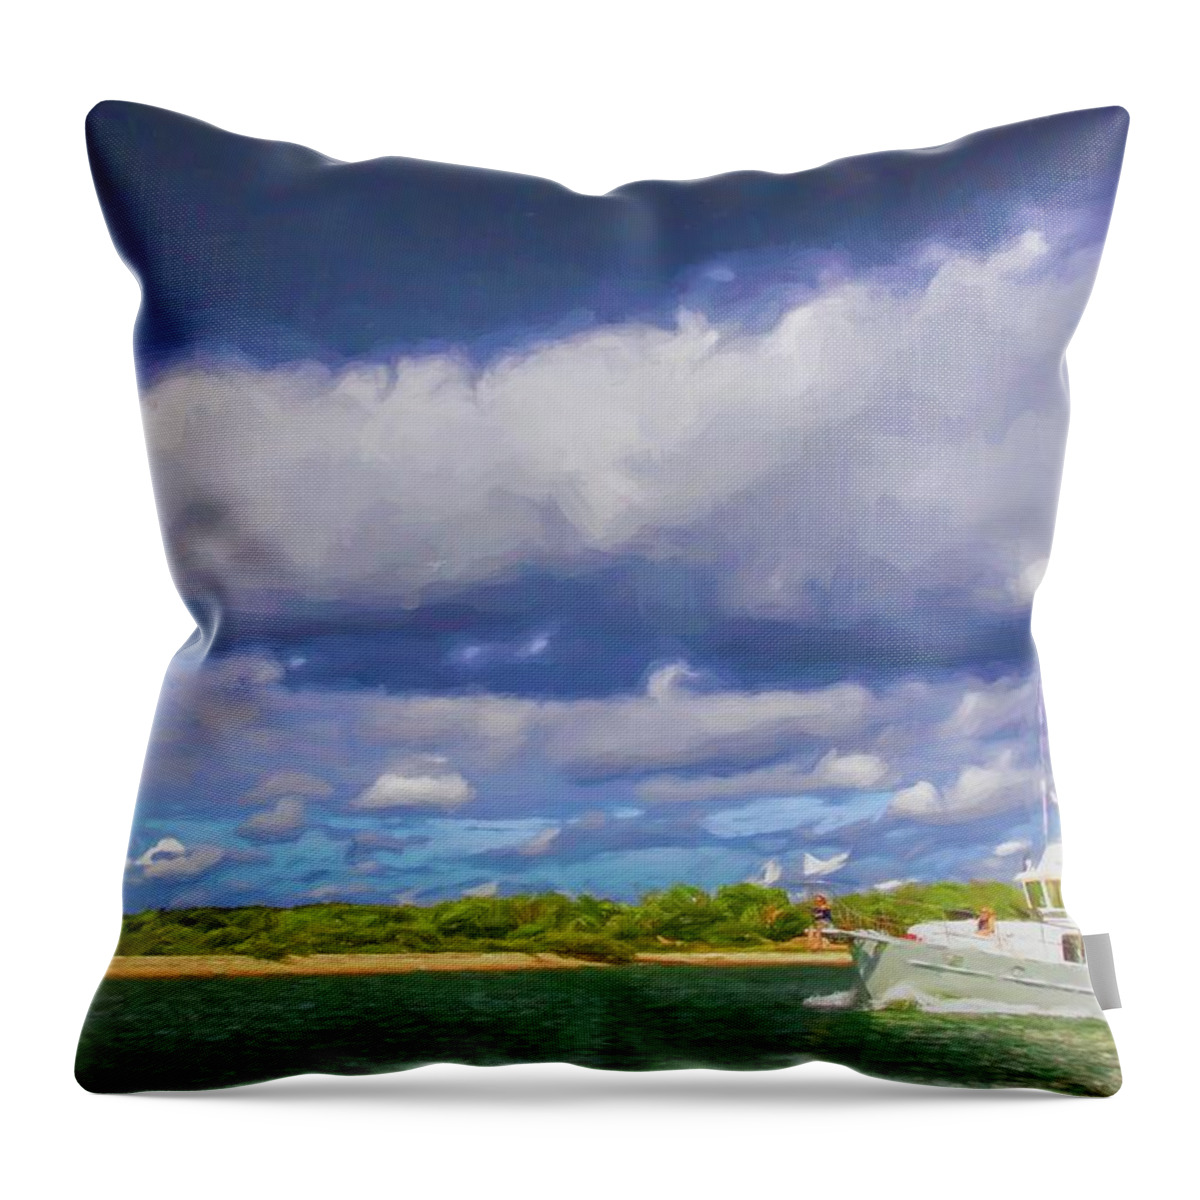 Alicegipsonphotographs Throw Pillow featuring the photograph Storm Is Coming Soon by Alice Gipson